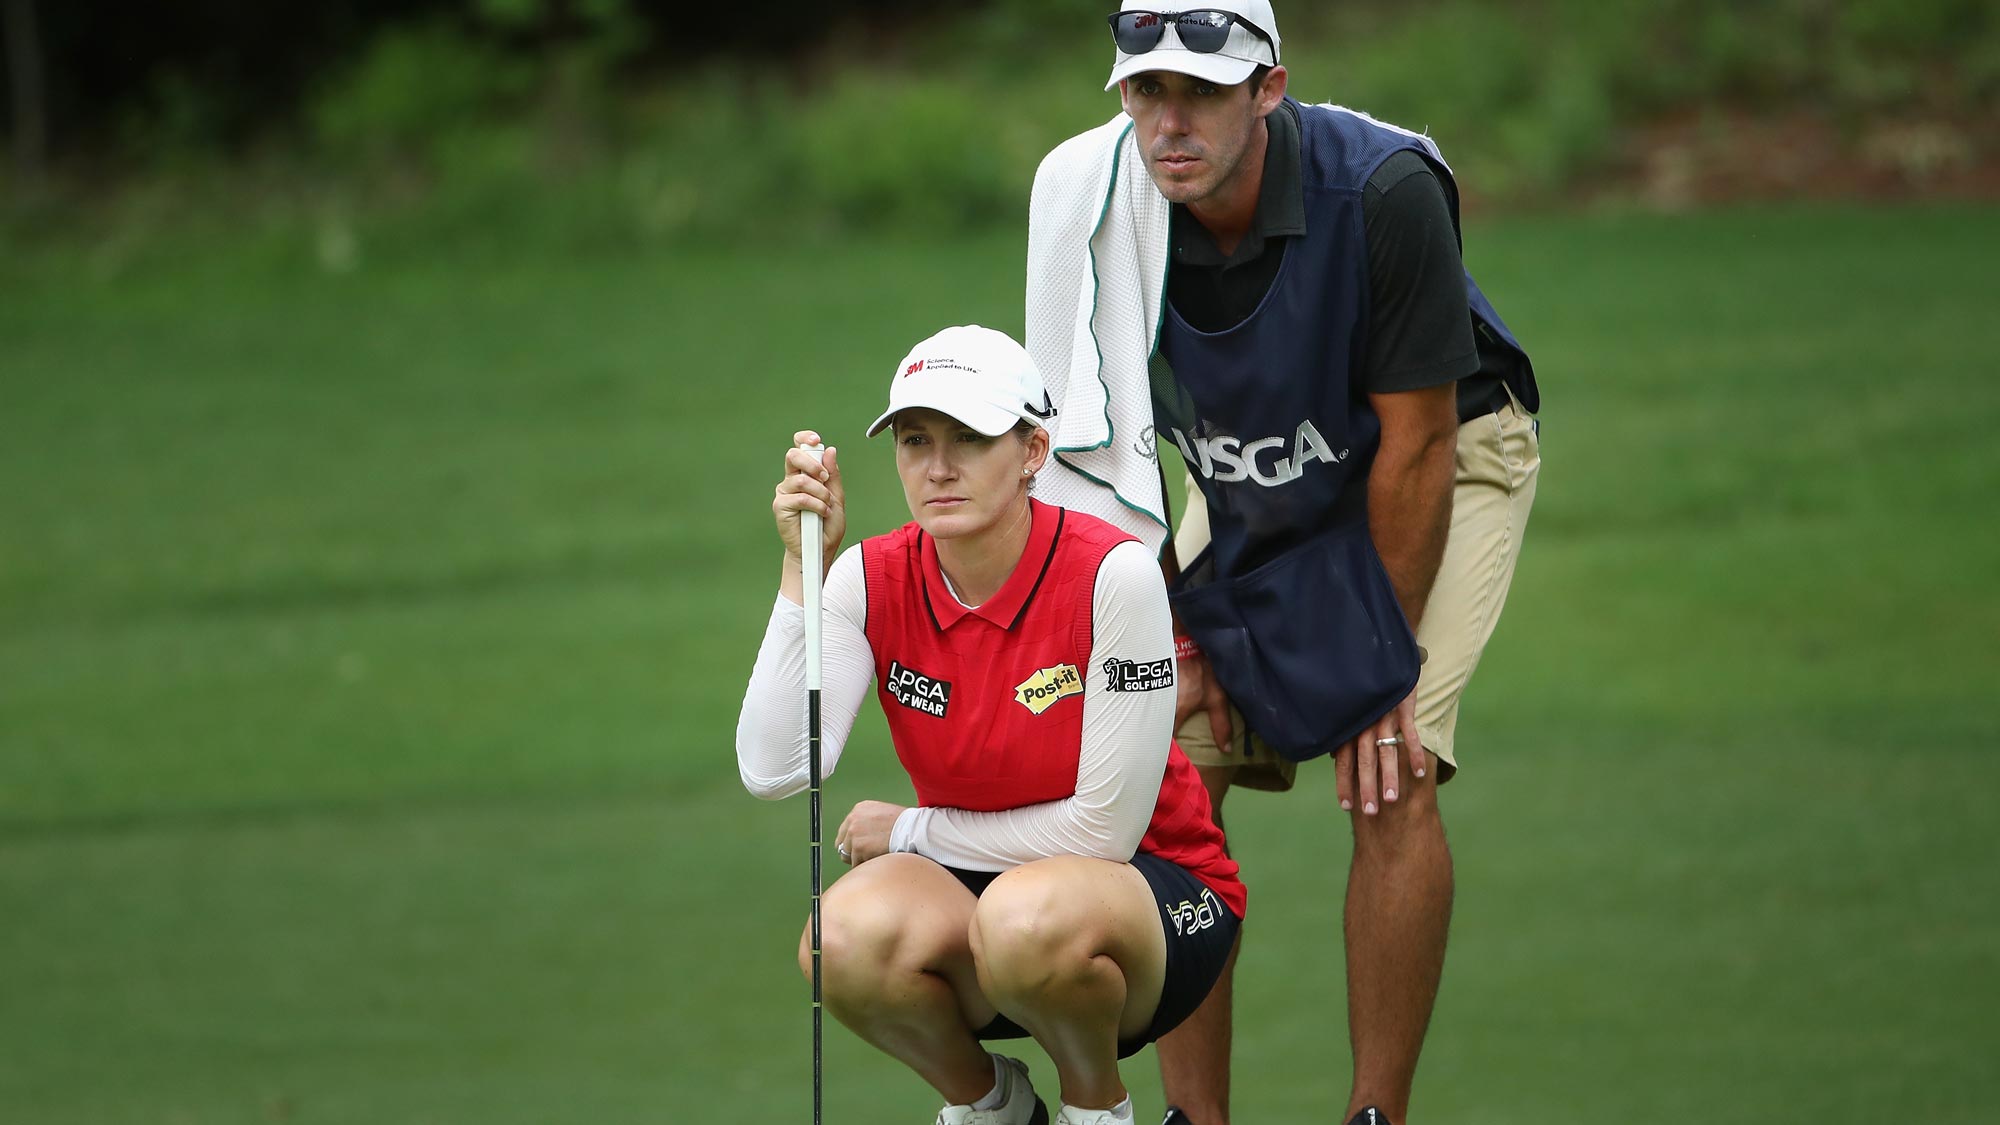 Sarah Jane Smith of Australia sand caddie/husband Duane Smith look over the 15th green during the second round of the 2018 U.S. Women's Open